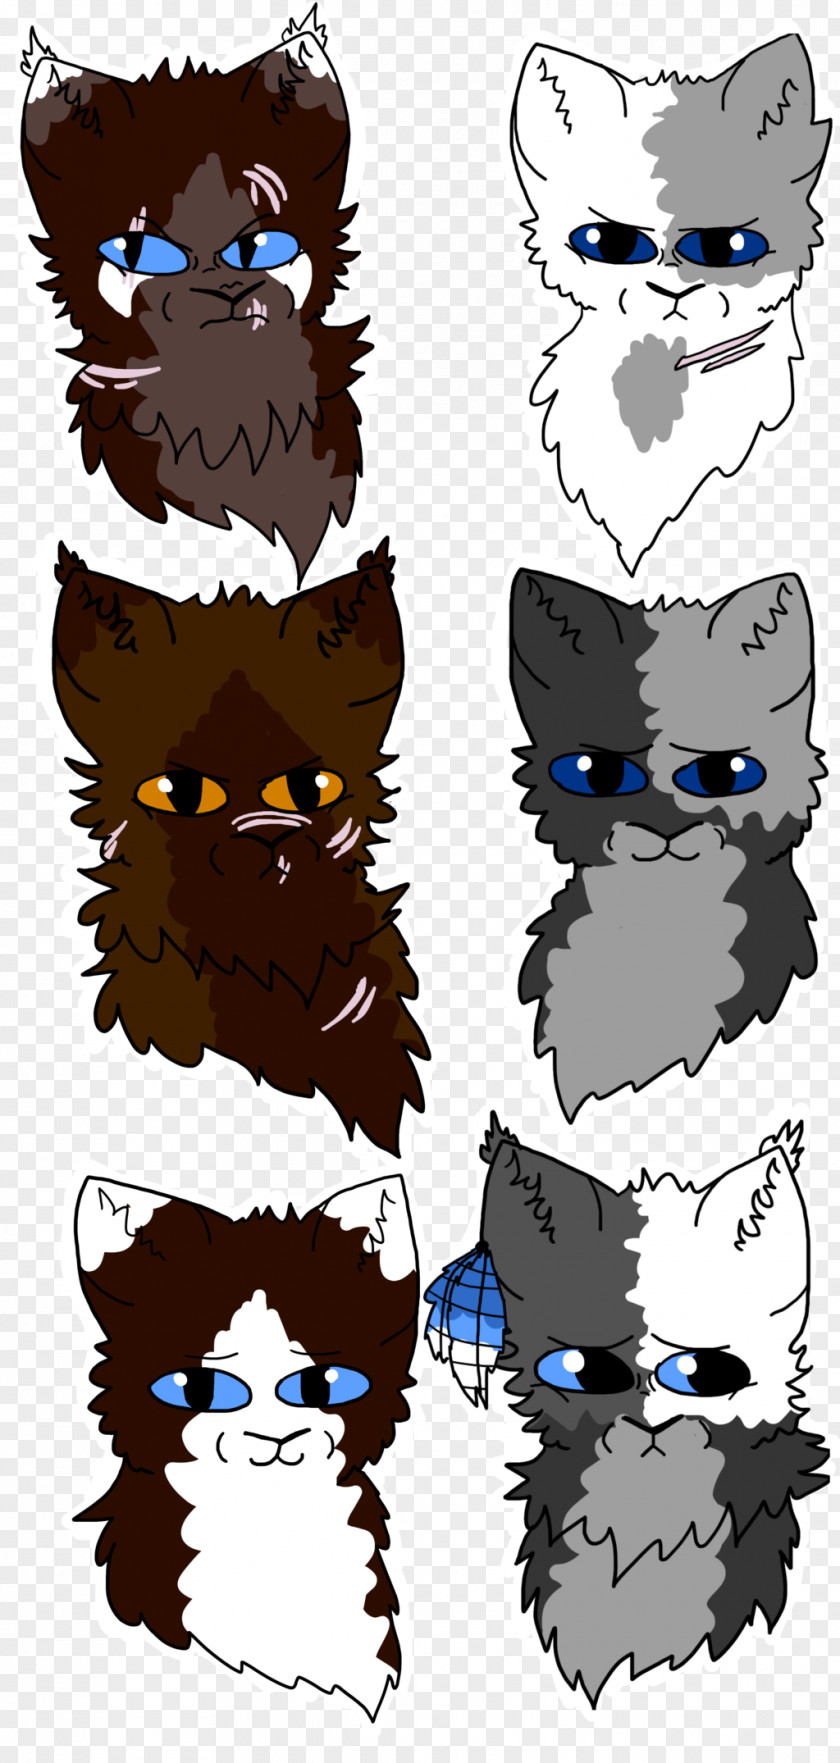 Cat Family Resemblance Art Illustration PNG